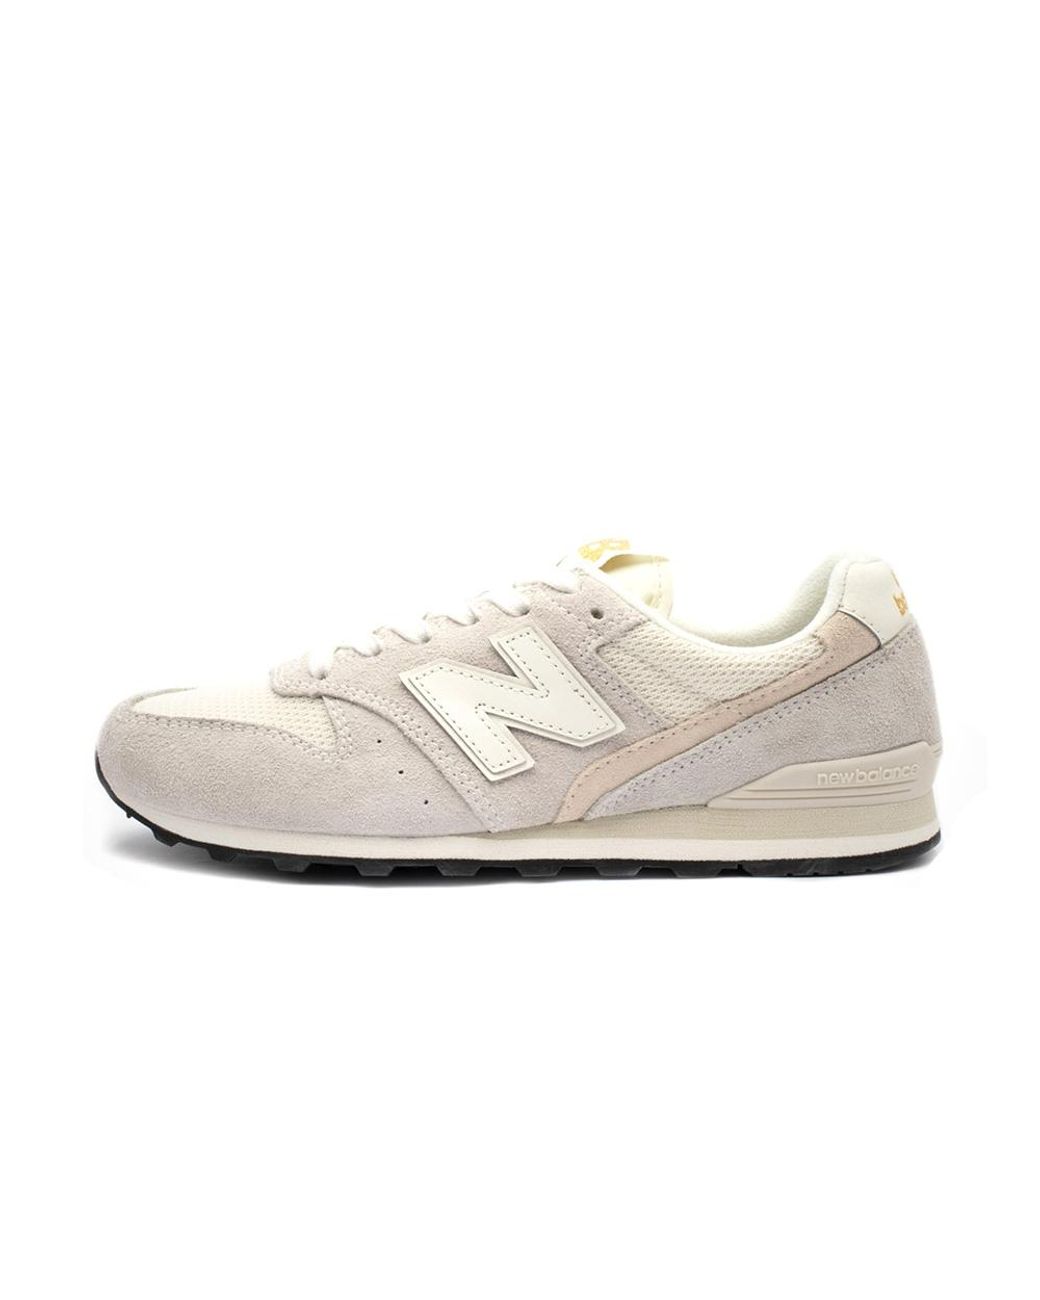 New Balance Angora With Sea Salt 996 Shoes in White | Lyst